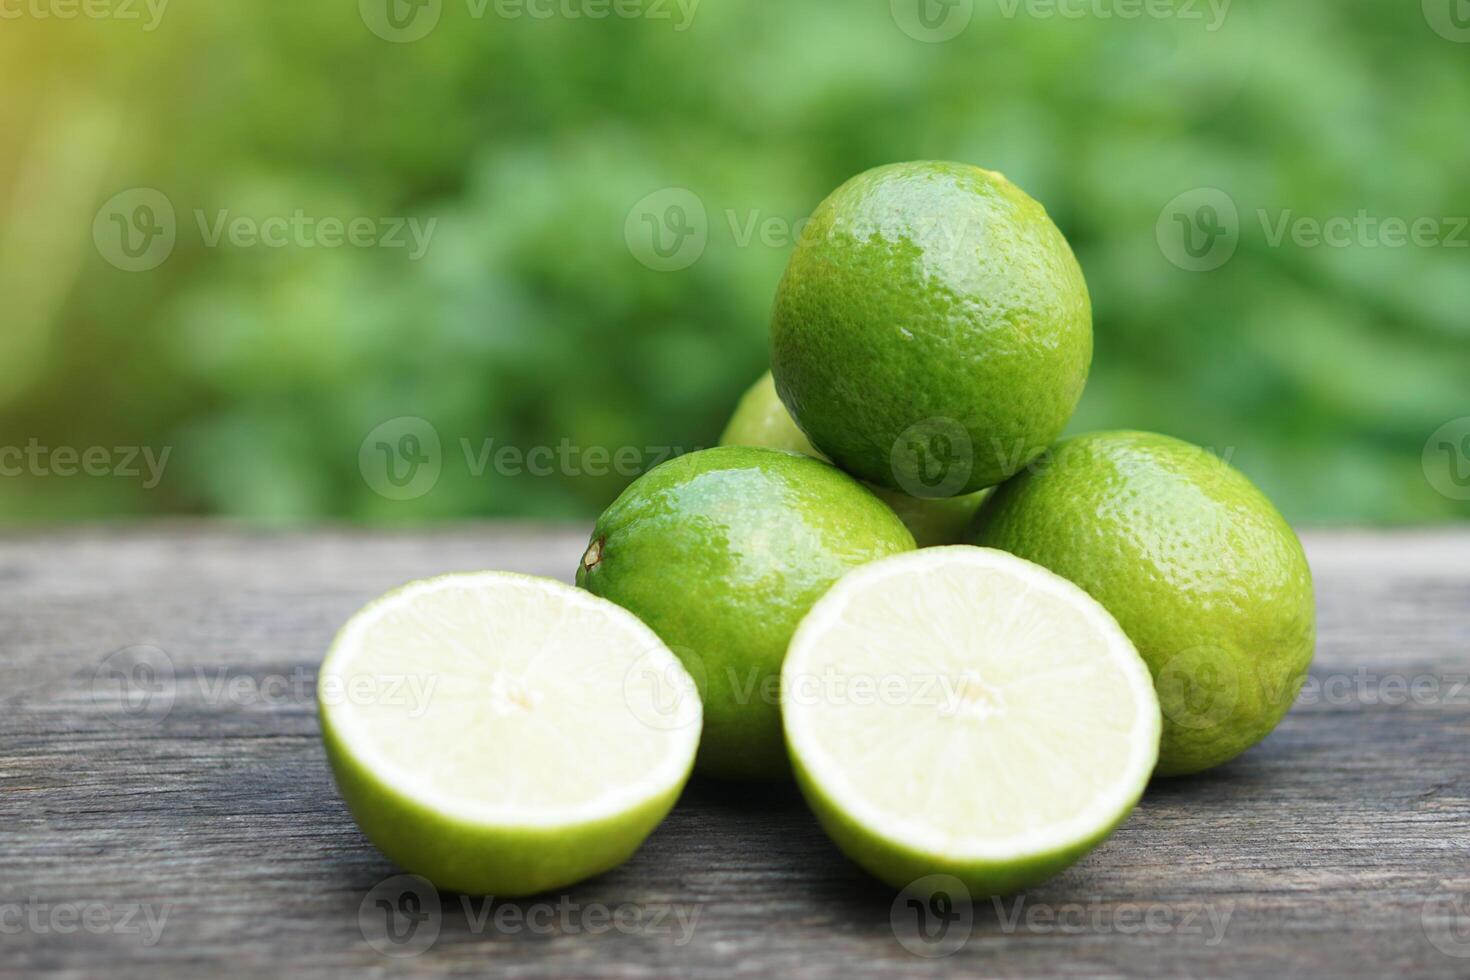 Green organic lime fruits. Concept, herbal fruits with sour taste, can be cooked as food seasoning or making beverage such as lemonade or juice, provide vitamin C. photo